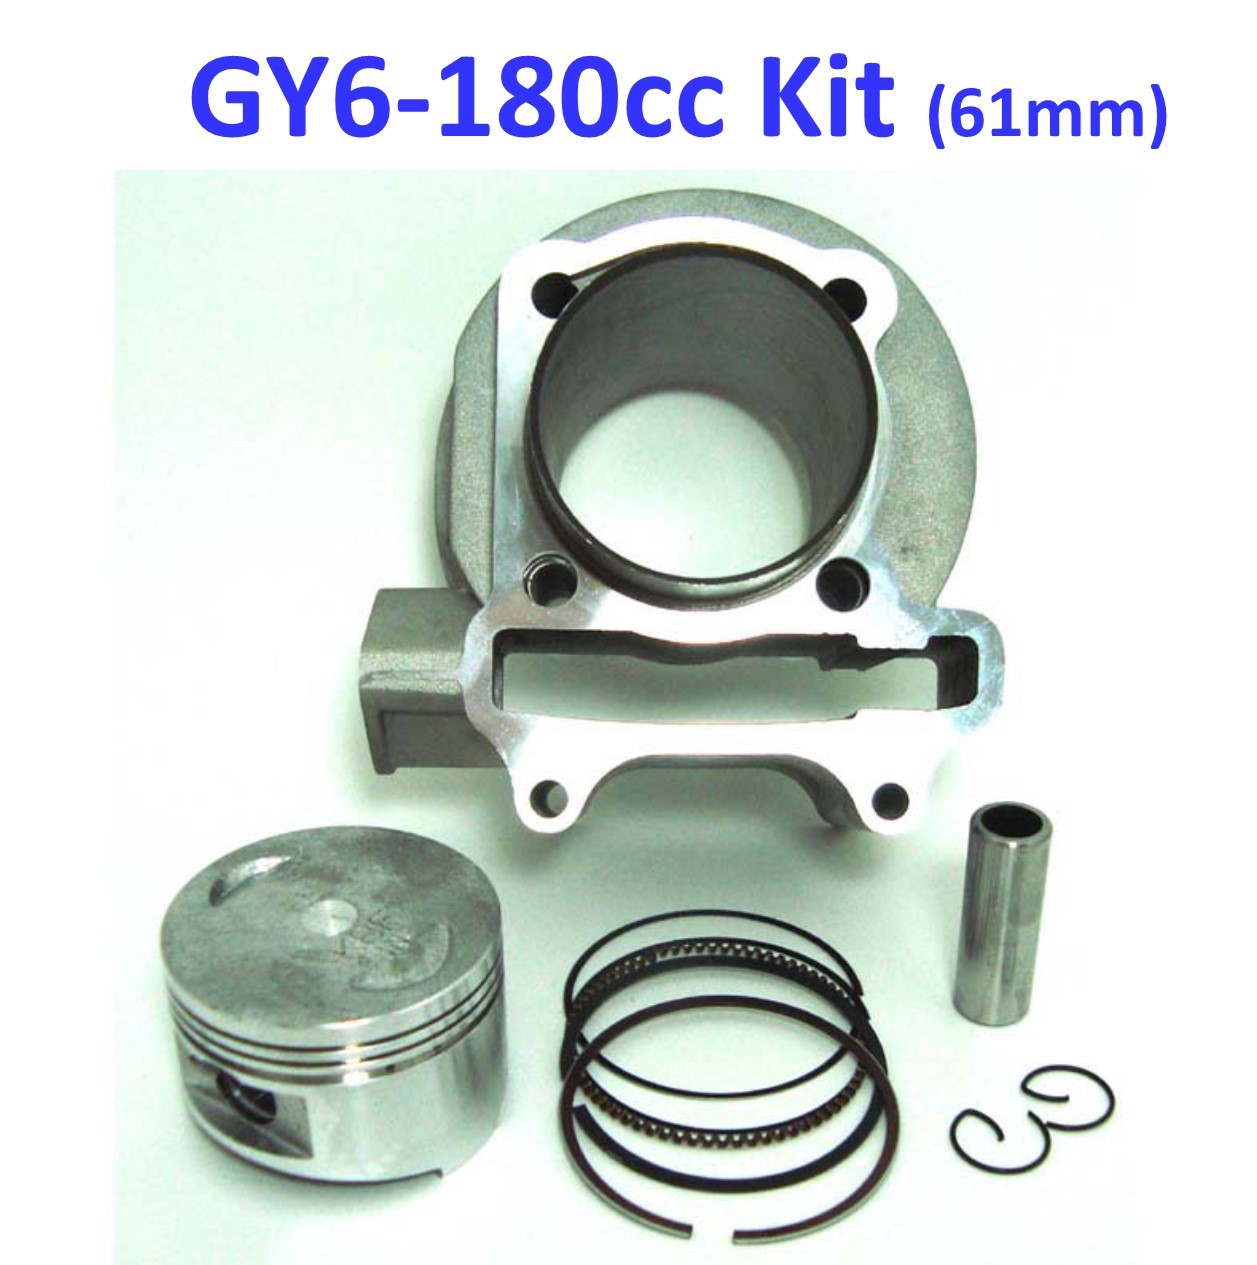 Cylinder Piston Top End Kit 180cc 4 Stroke GY6-180 ATVs, GoKarts, Scooters TYPE 1 BOLT PATTERN B=61 H=69 NOTE:Cyl Skirt OD=65 May require opening crankcase, check before ordering. - Click Image to Close